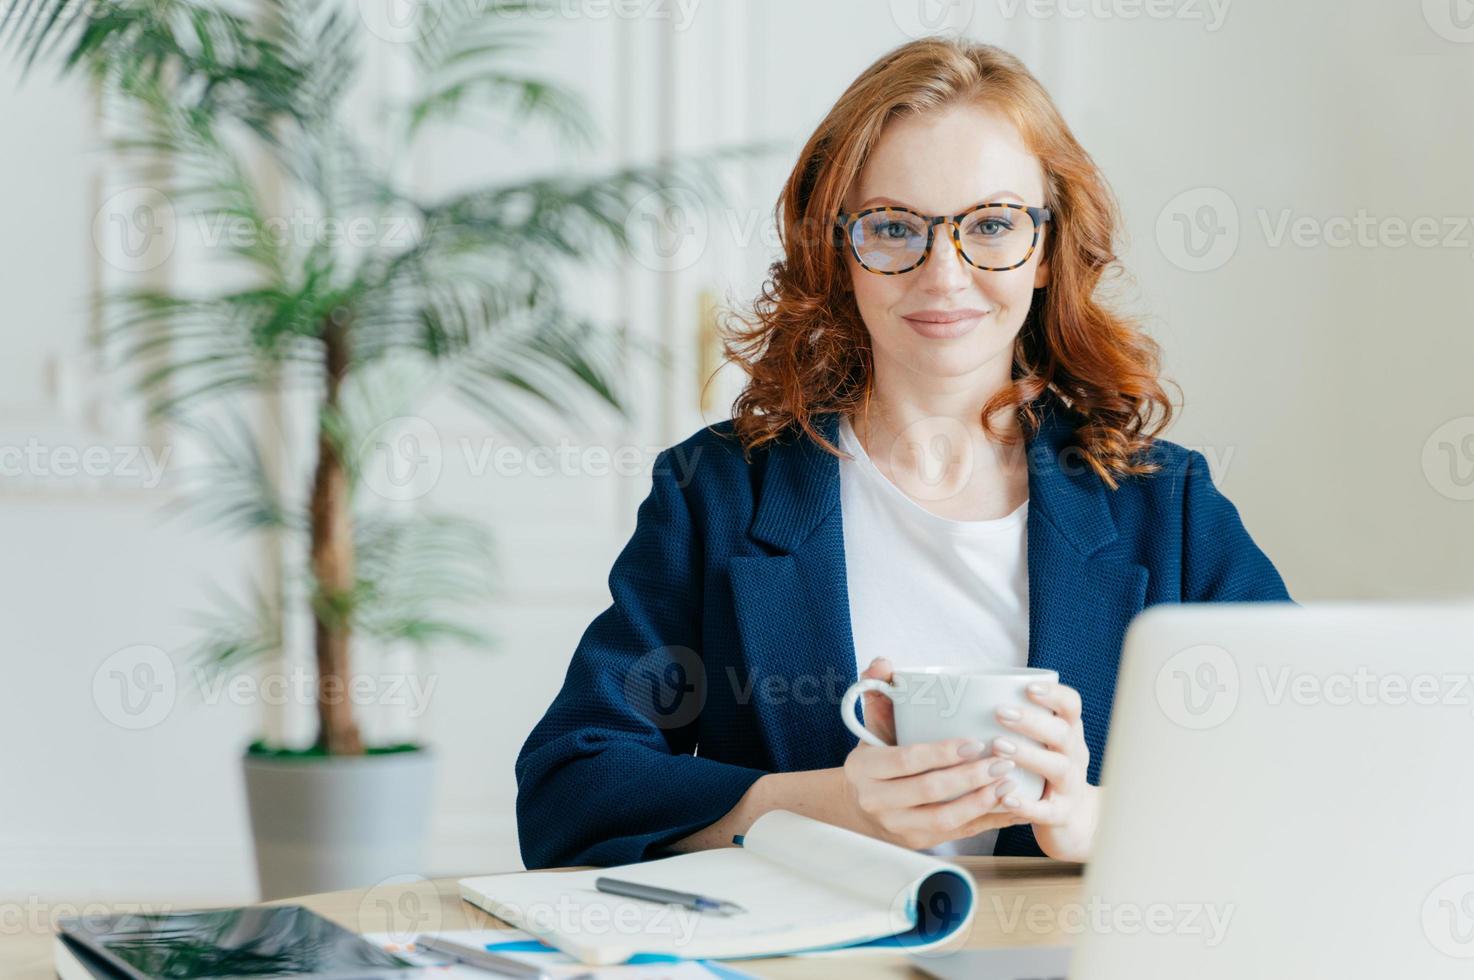 Pleasant looking elegant female freelancer books items on web store, reads news in internet, writes notes in notepad, works on laptop computer, dressed in elegant outfit. Business and work concept photo